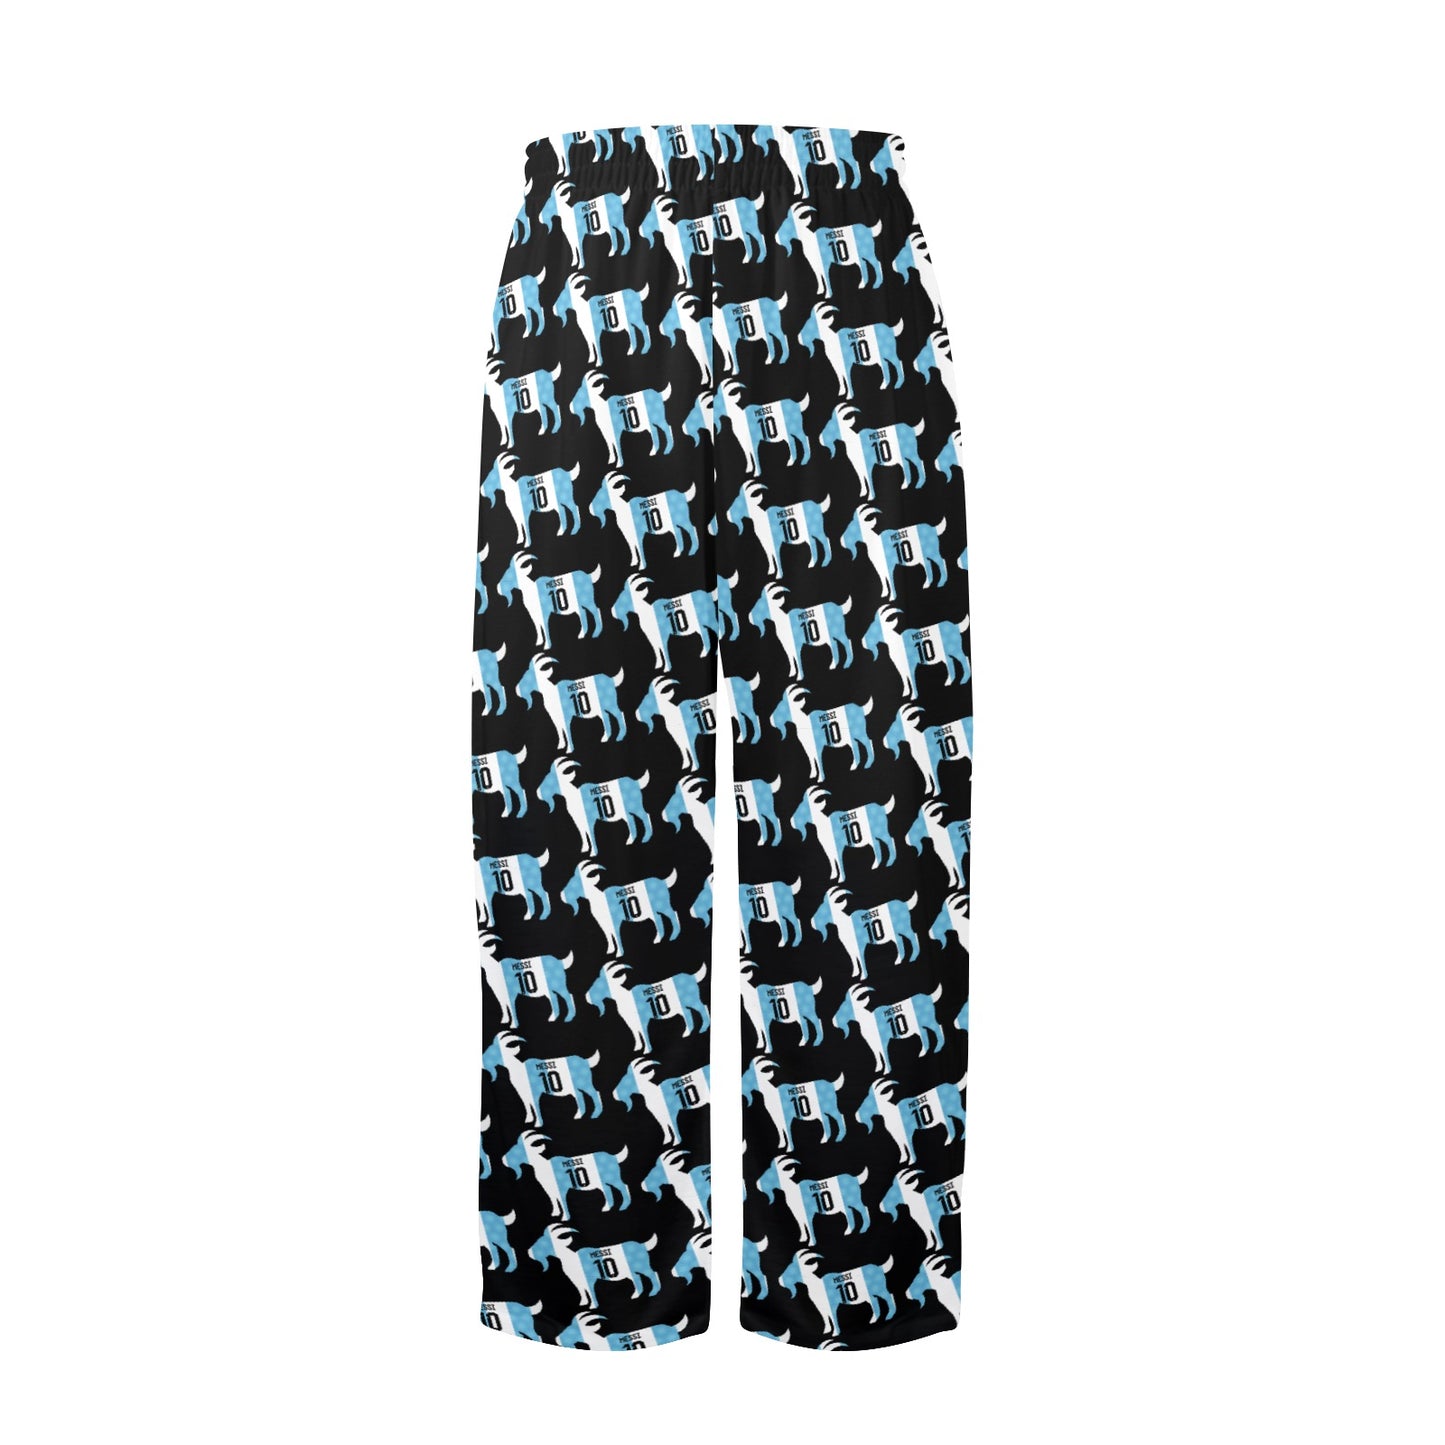 GOAT Lionel Messi •  Soccer Pajama Pants • Trouser Pajamas Pants for Kids • Birthday Gift